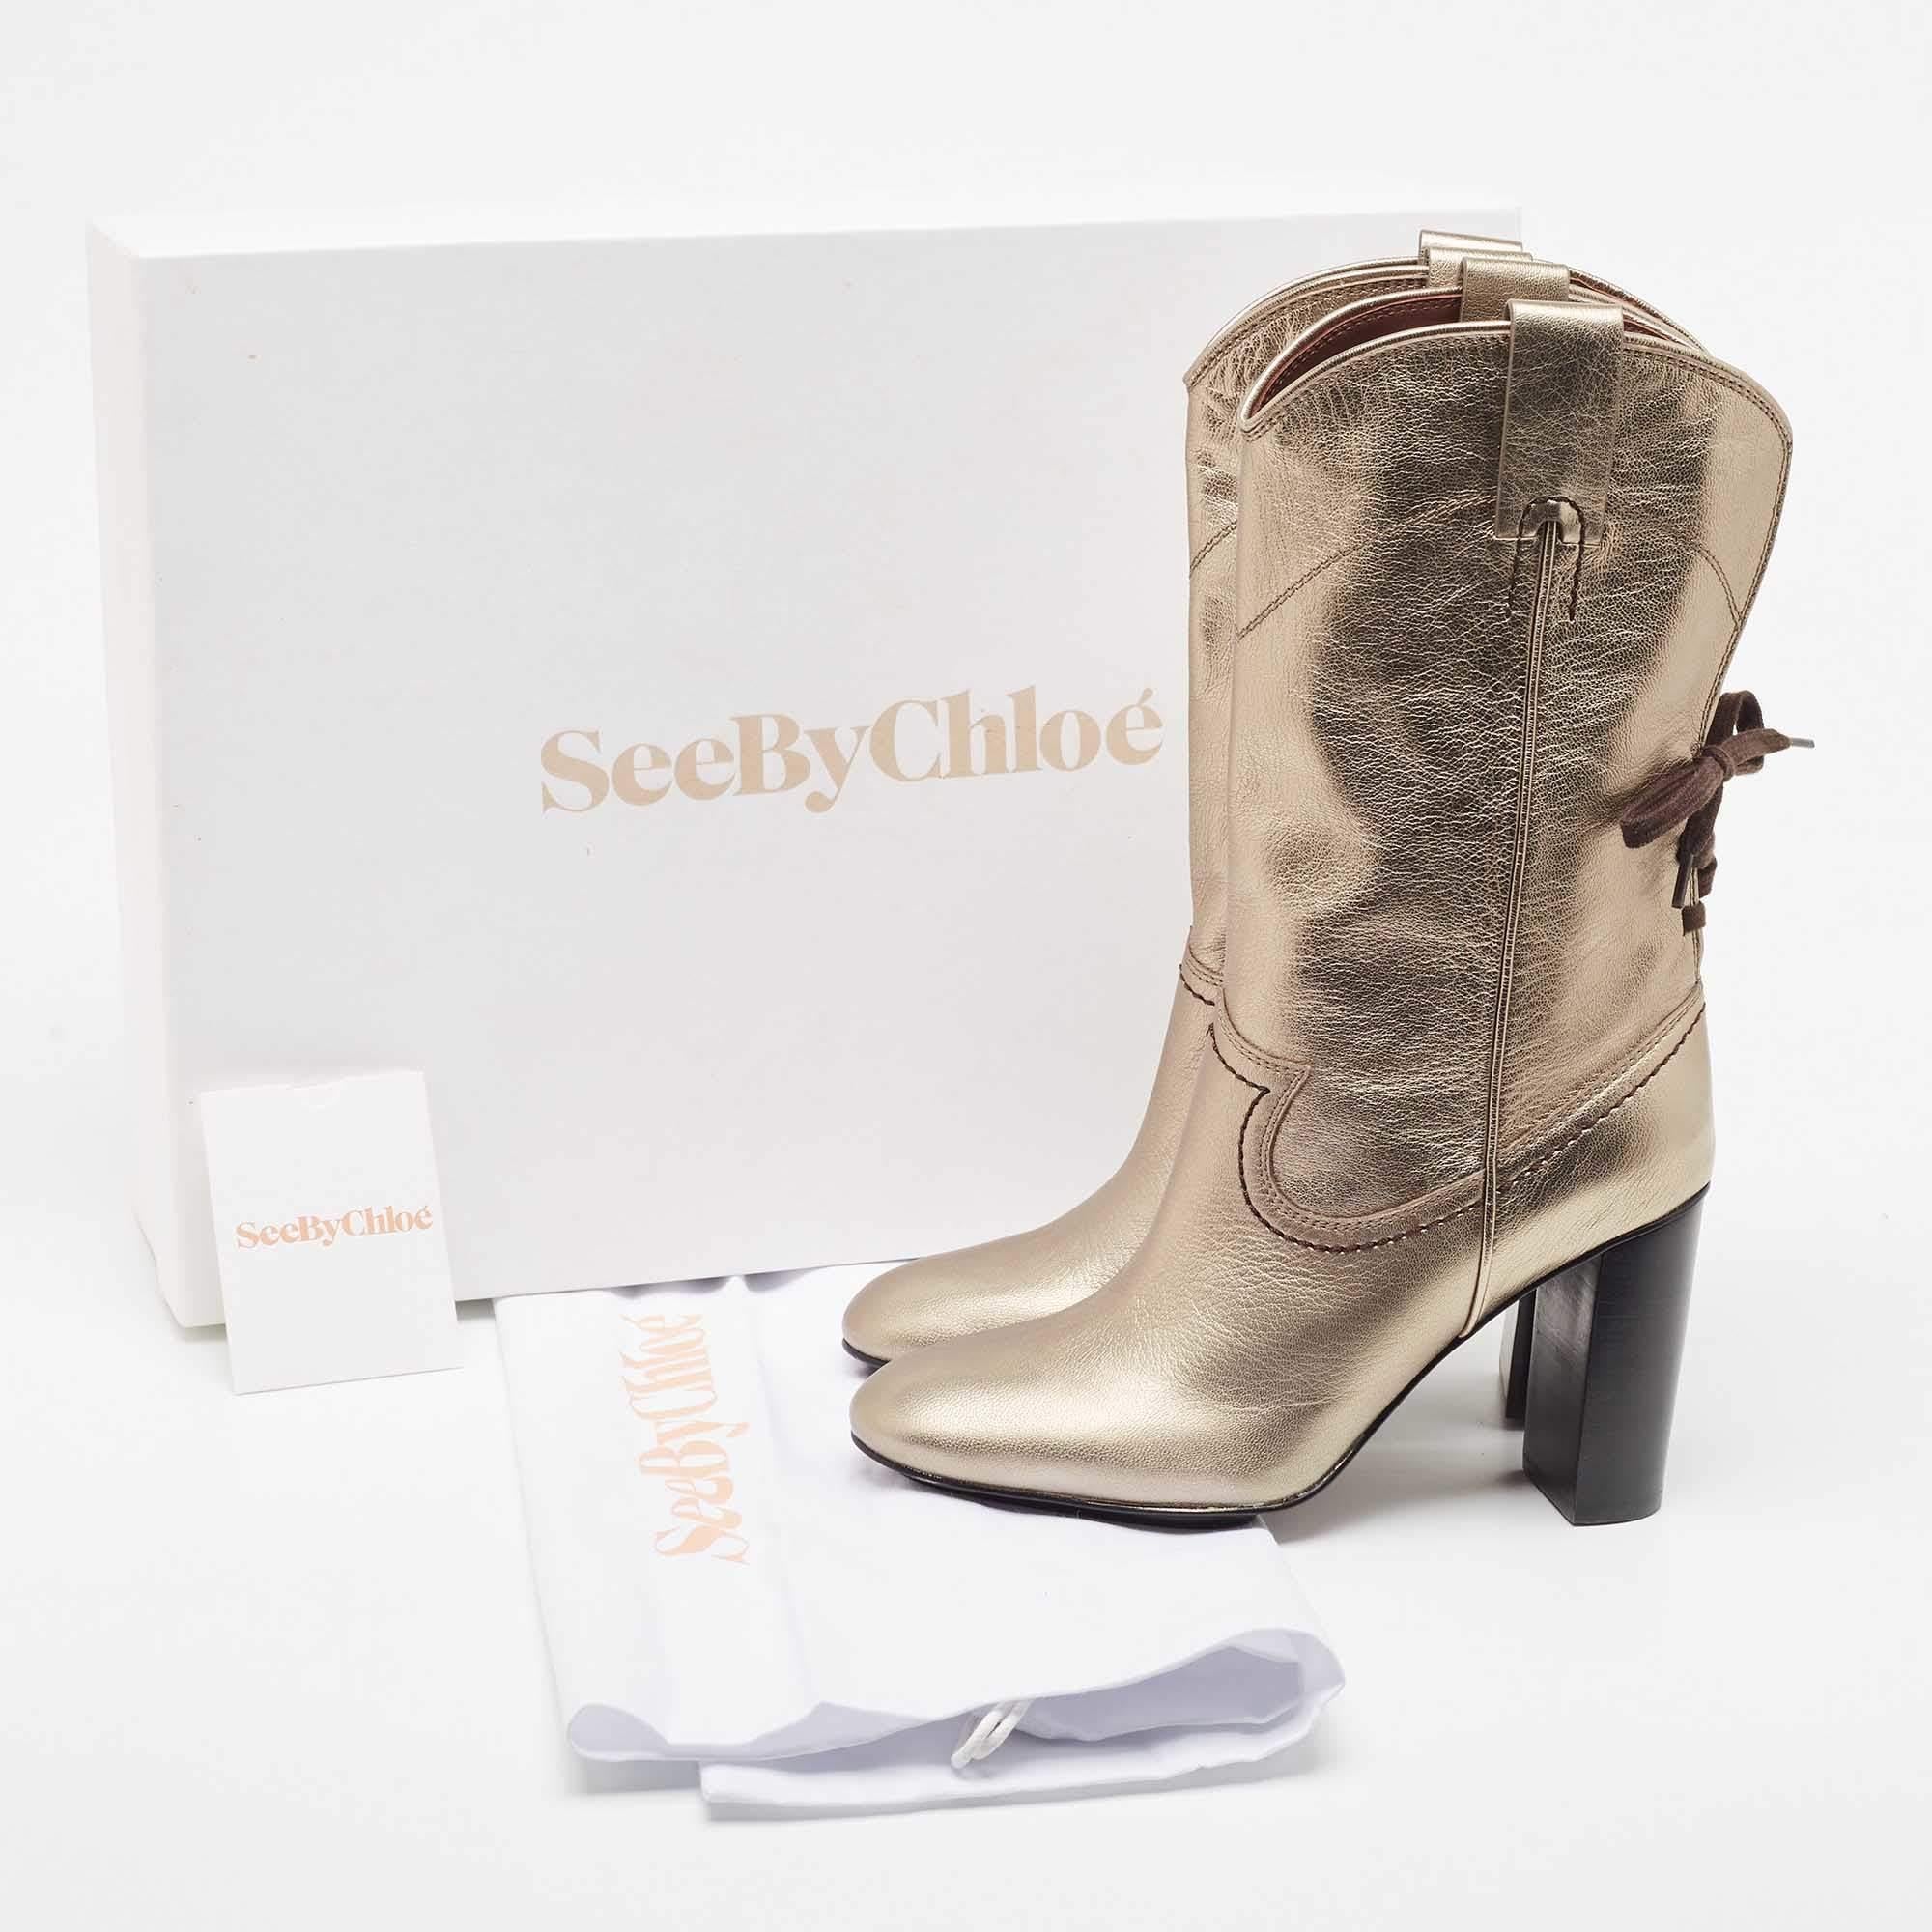 See by Chloe Gold Leather Ankle Boots Size 38 5